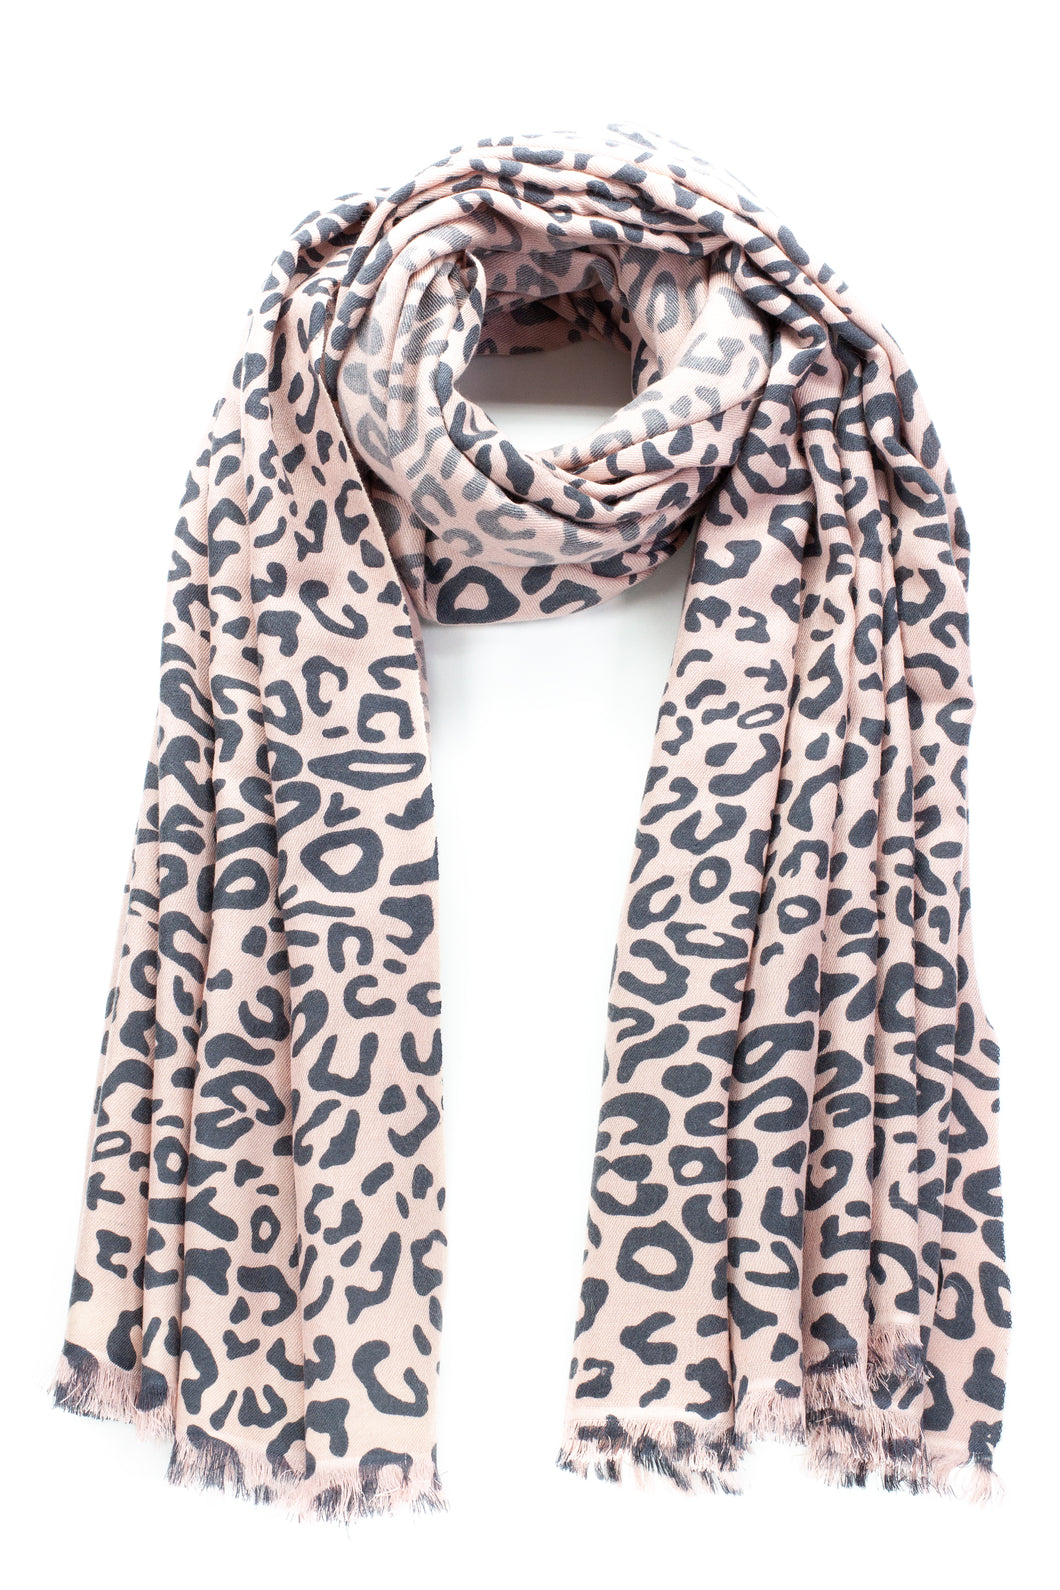 70% Cashmere & 30% Silk Leopard Print Hand Crafted Long Winter Scarf Women